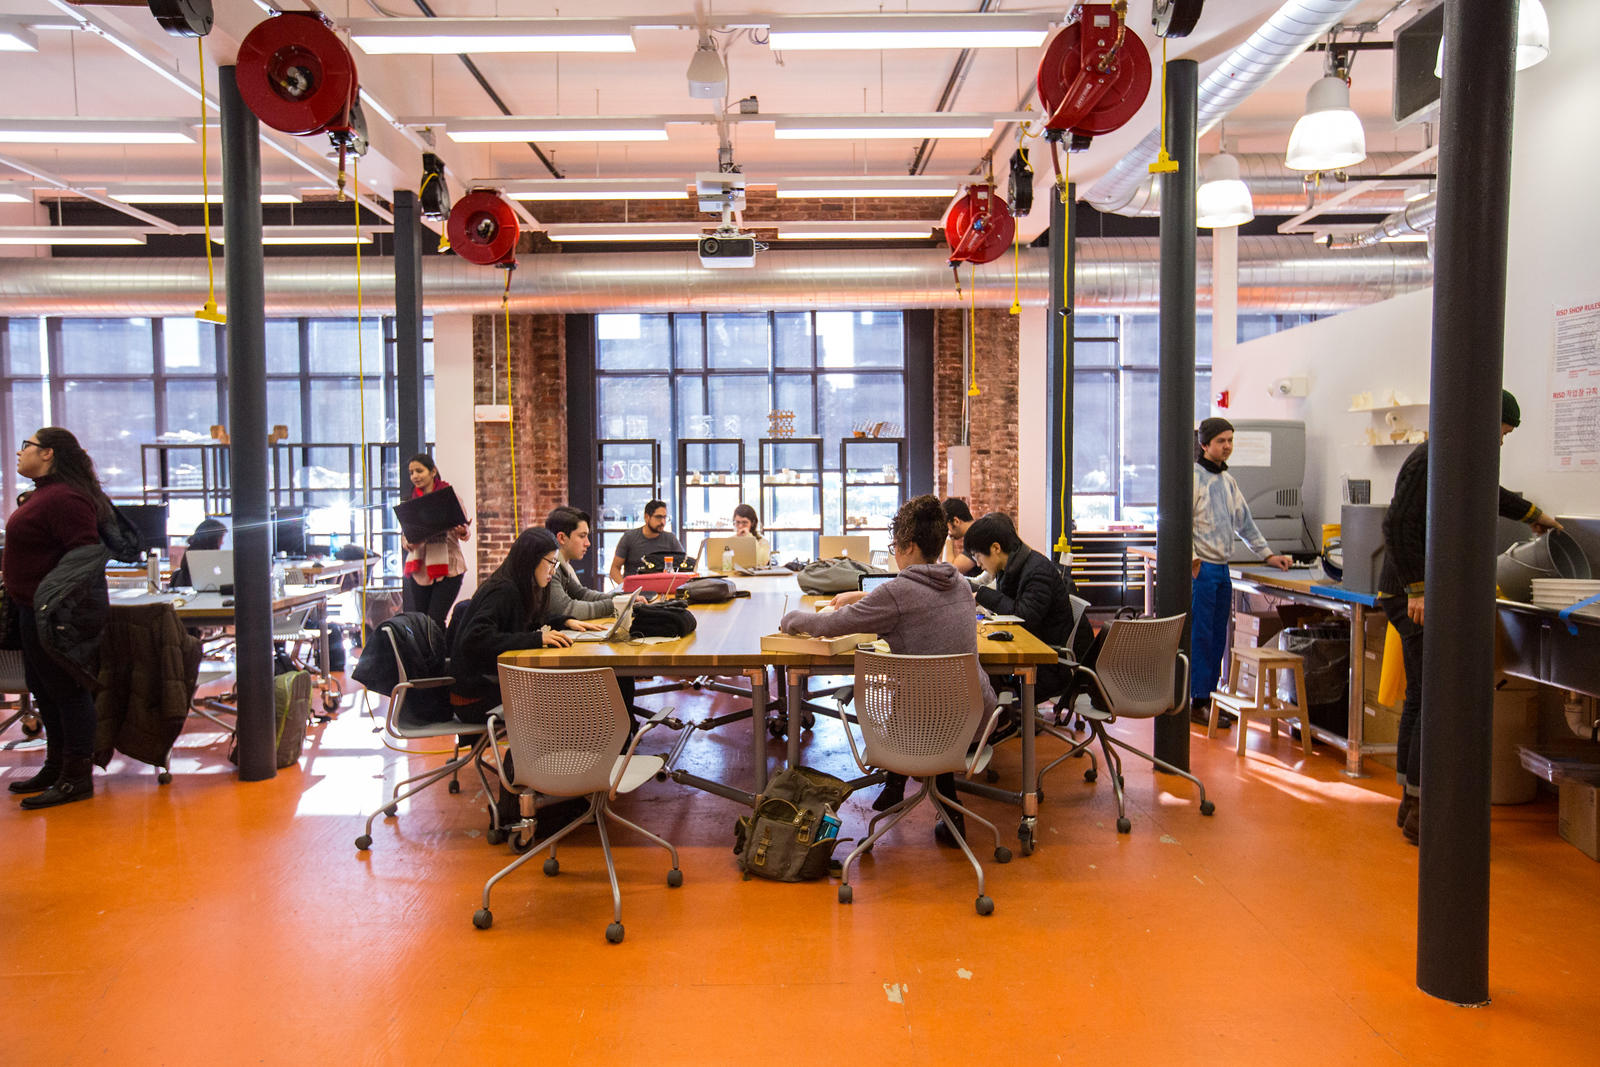 interior shot of co-works, showing students working at large tables in front of floor to ceiling windows. Laser cut and 3D printed objects sit on shelves behind.